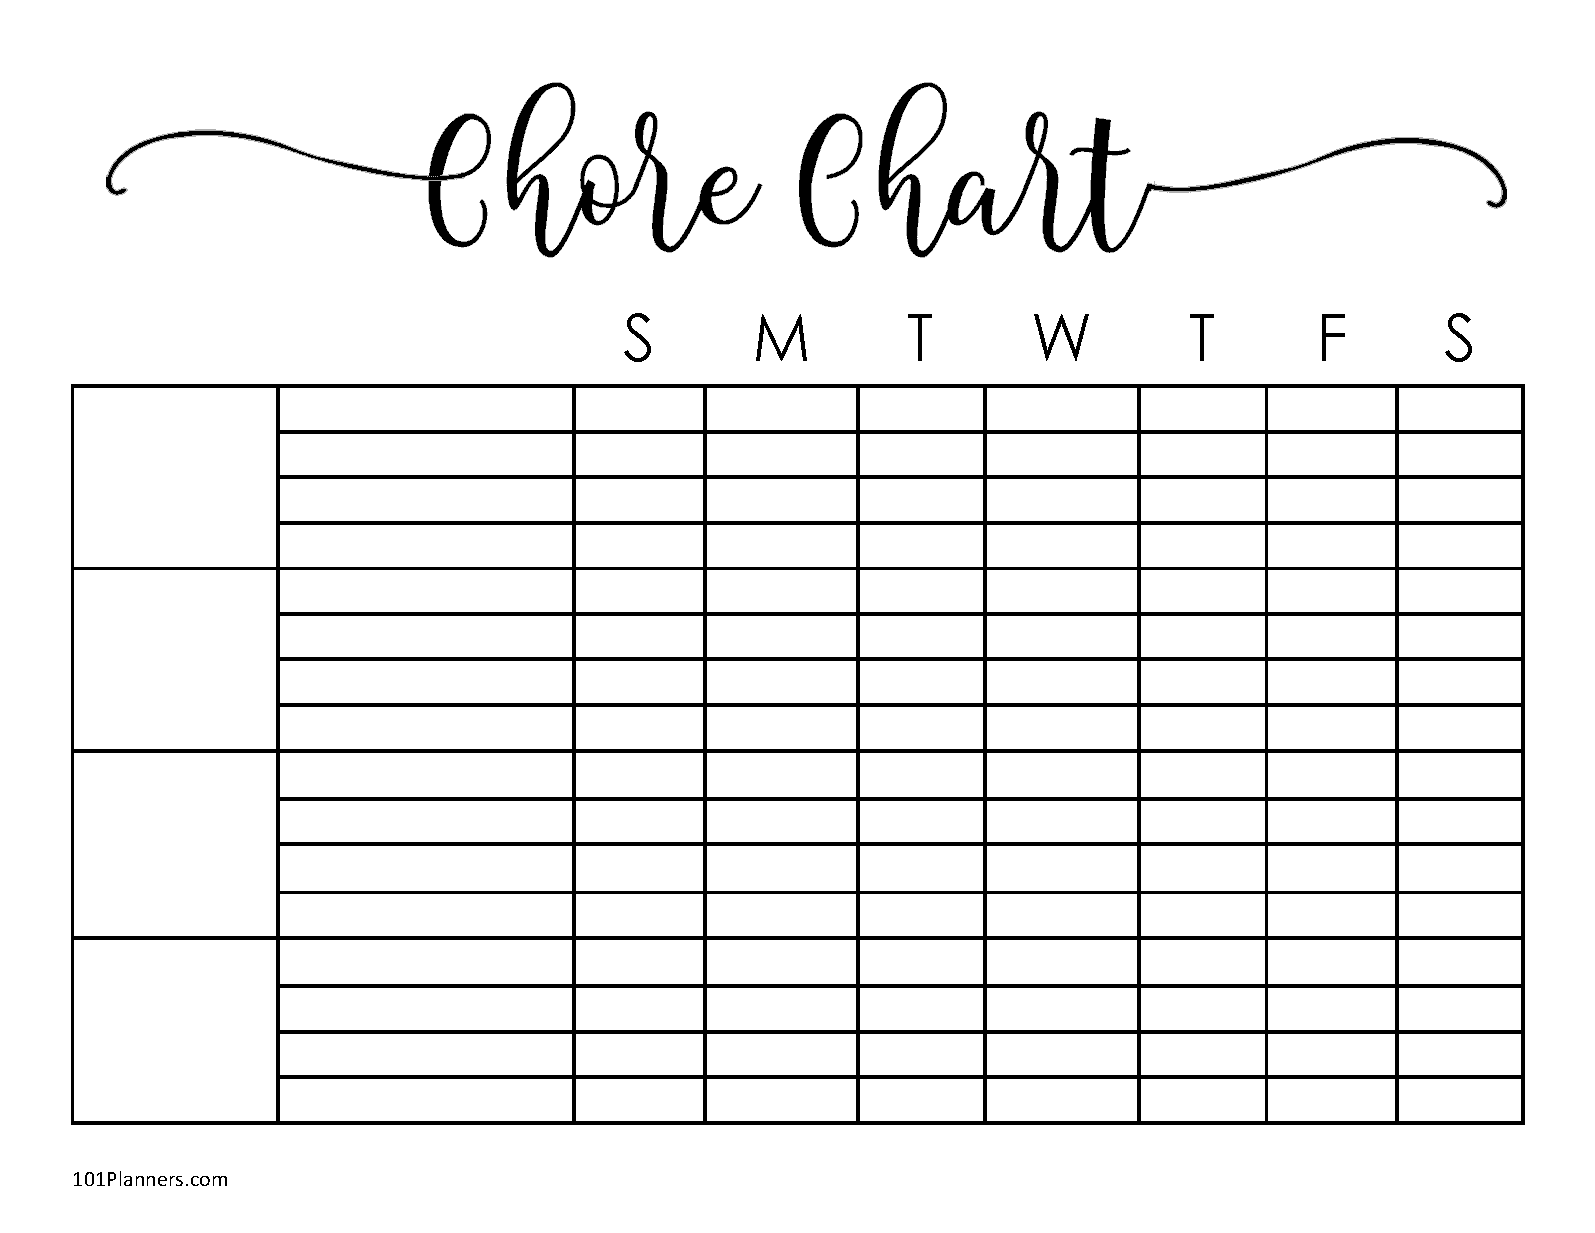 Printable Family Chore Chart Template from www.101planners.com